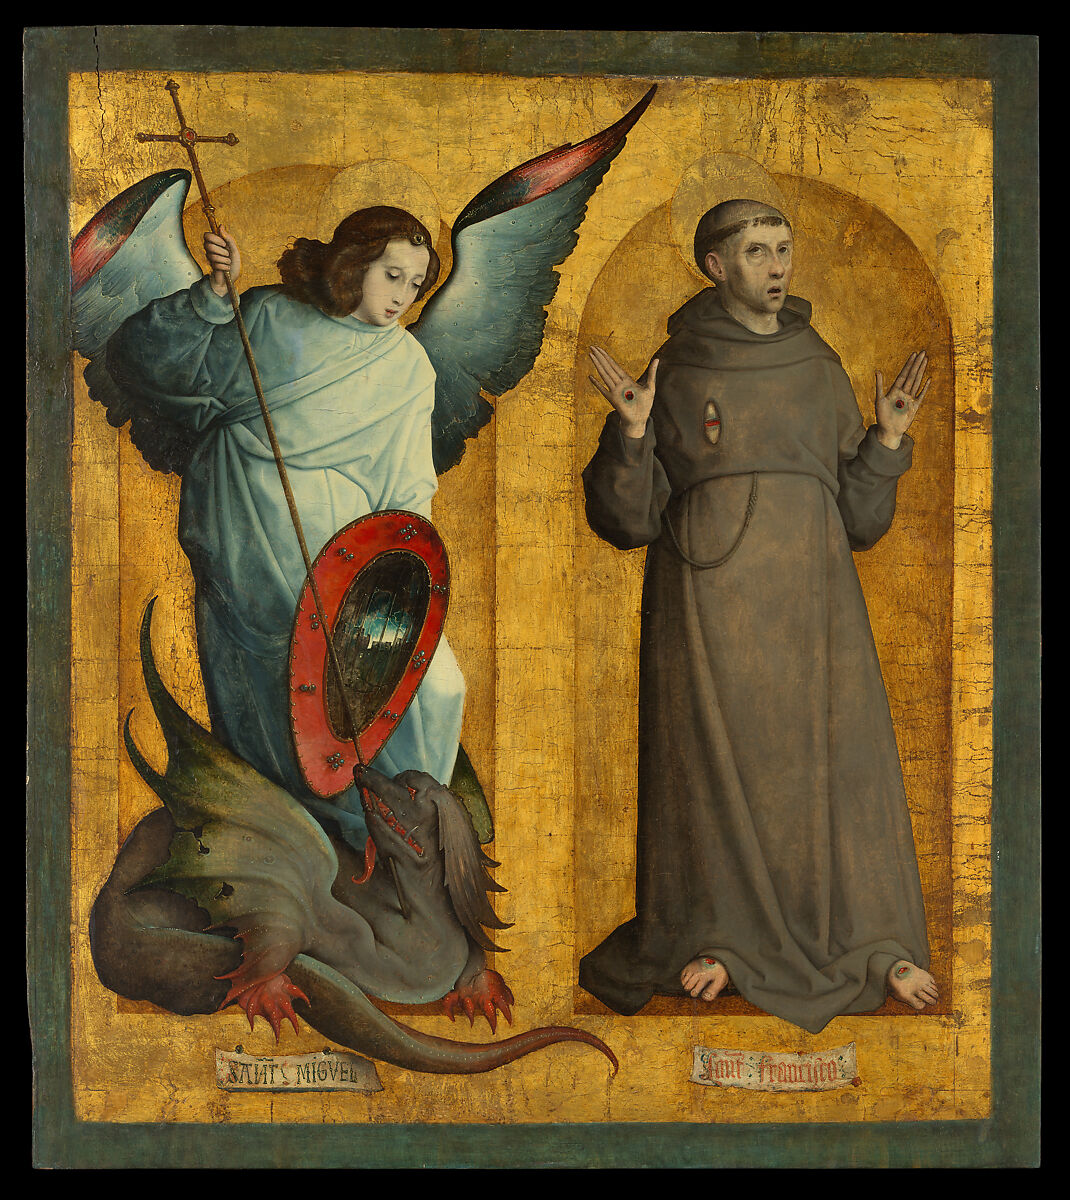 Saints Michael and Francis, Juan de Flandes (Netherlandish, active by 1496–died 1519 Palencia), Oil on wood, gold ground 